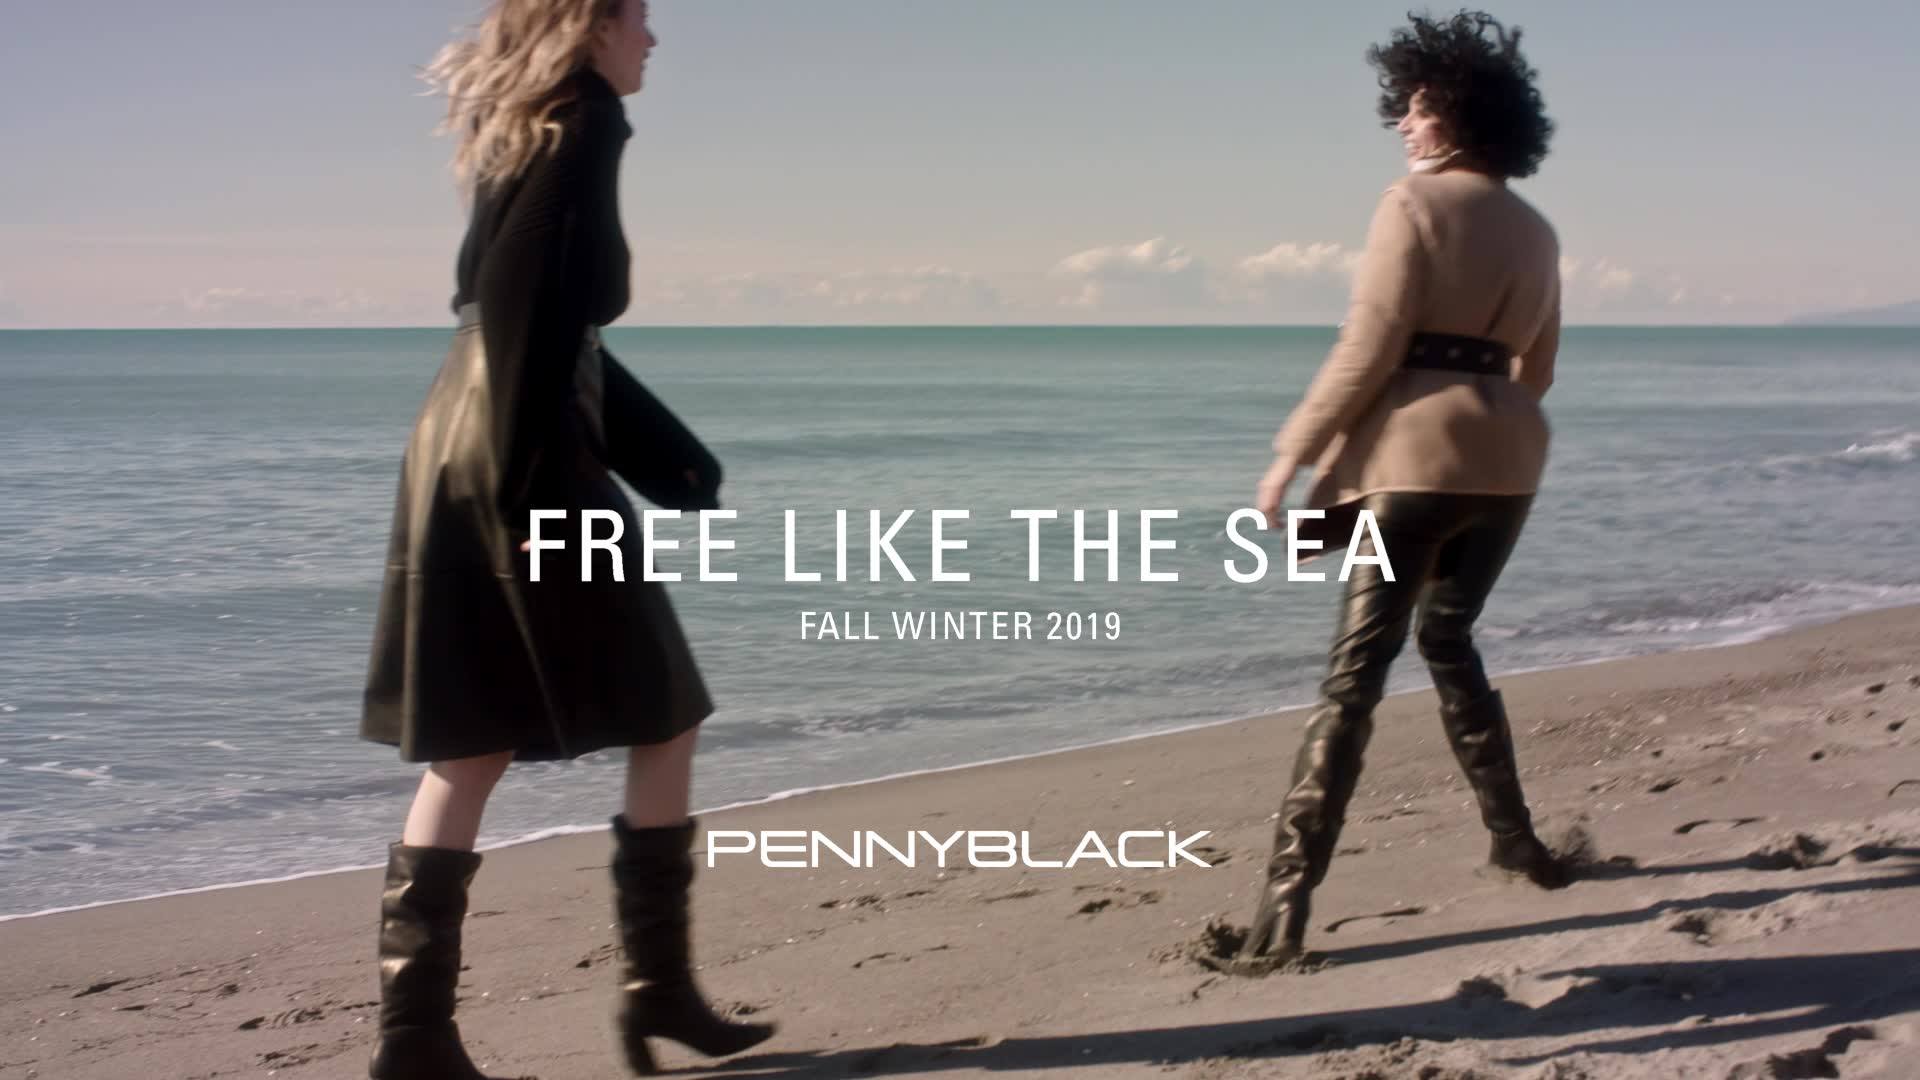 An eclectic style, combining heterogeneous inspiration and always capturing the spark of what is desirable to wear. The FW 2019 Pennyblack collection knows the classic dress code rules but explores brand new aesthetics.